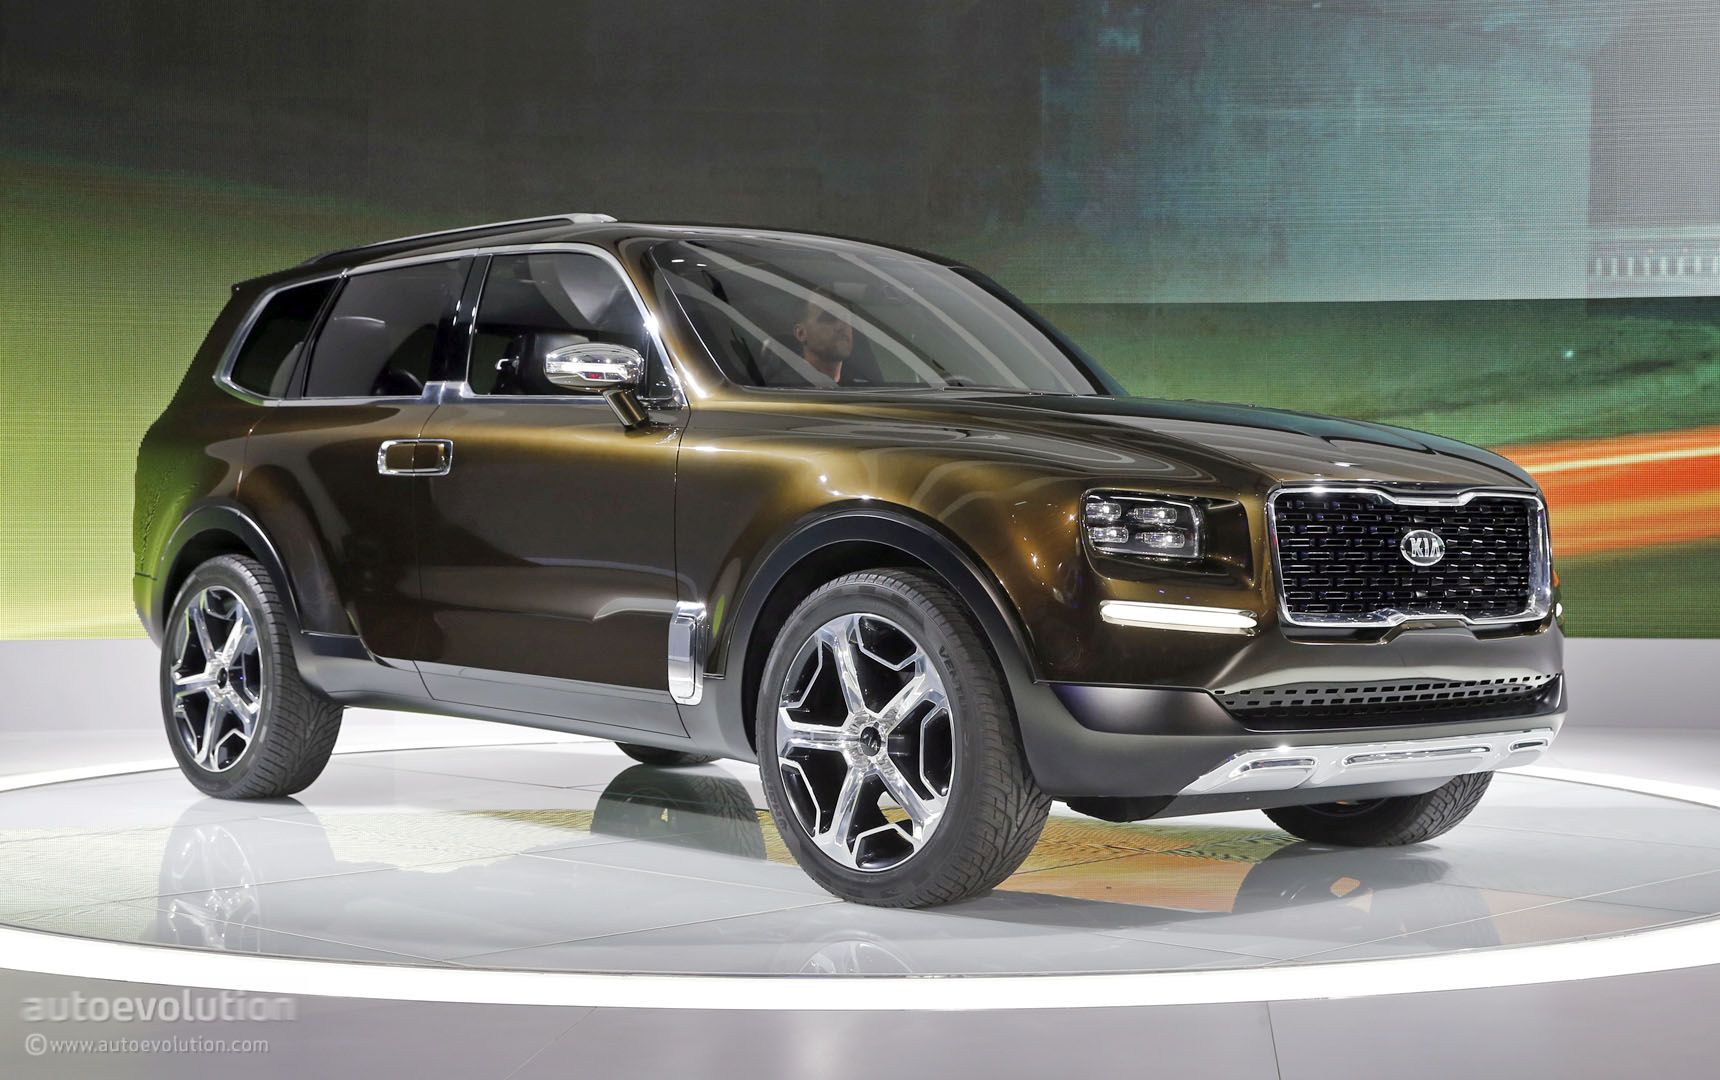 2019 Kia Telluride SUV Spied For The First Time, Looks Ready For